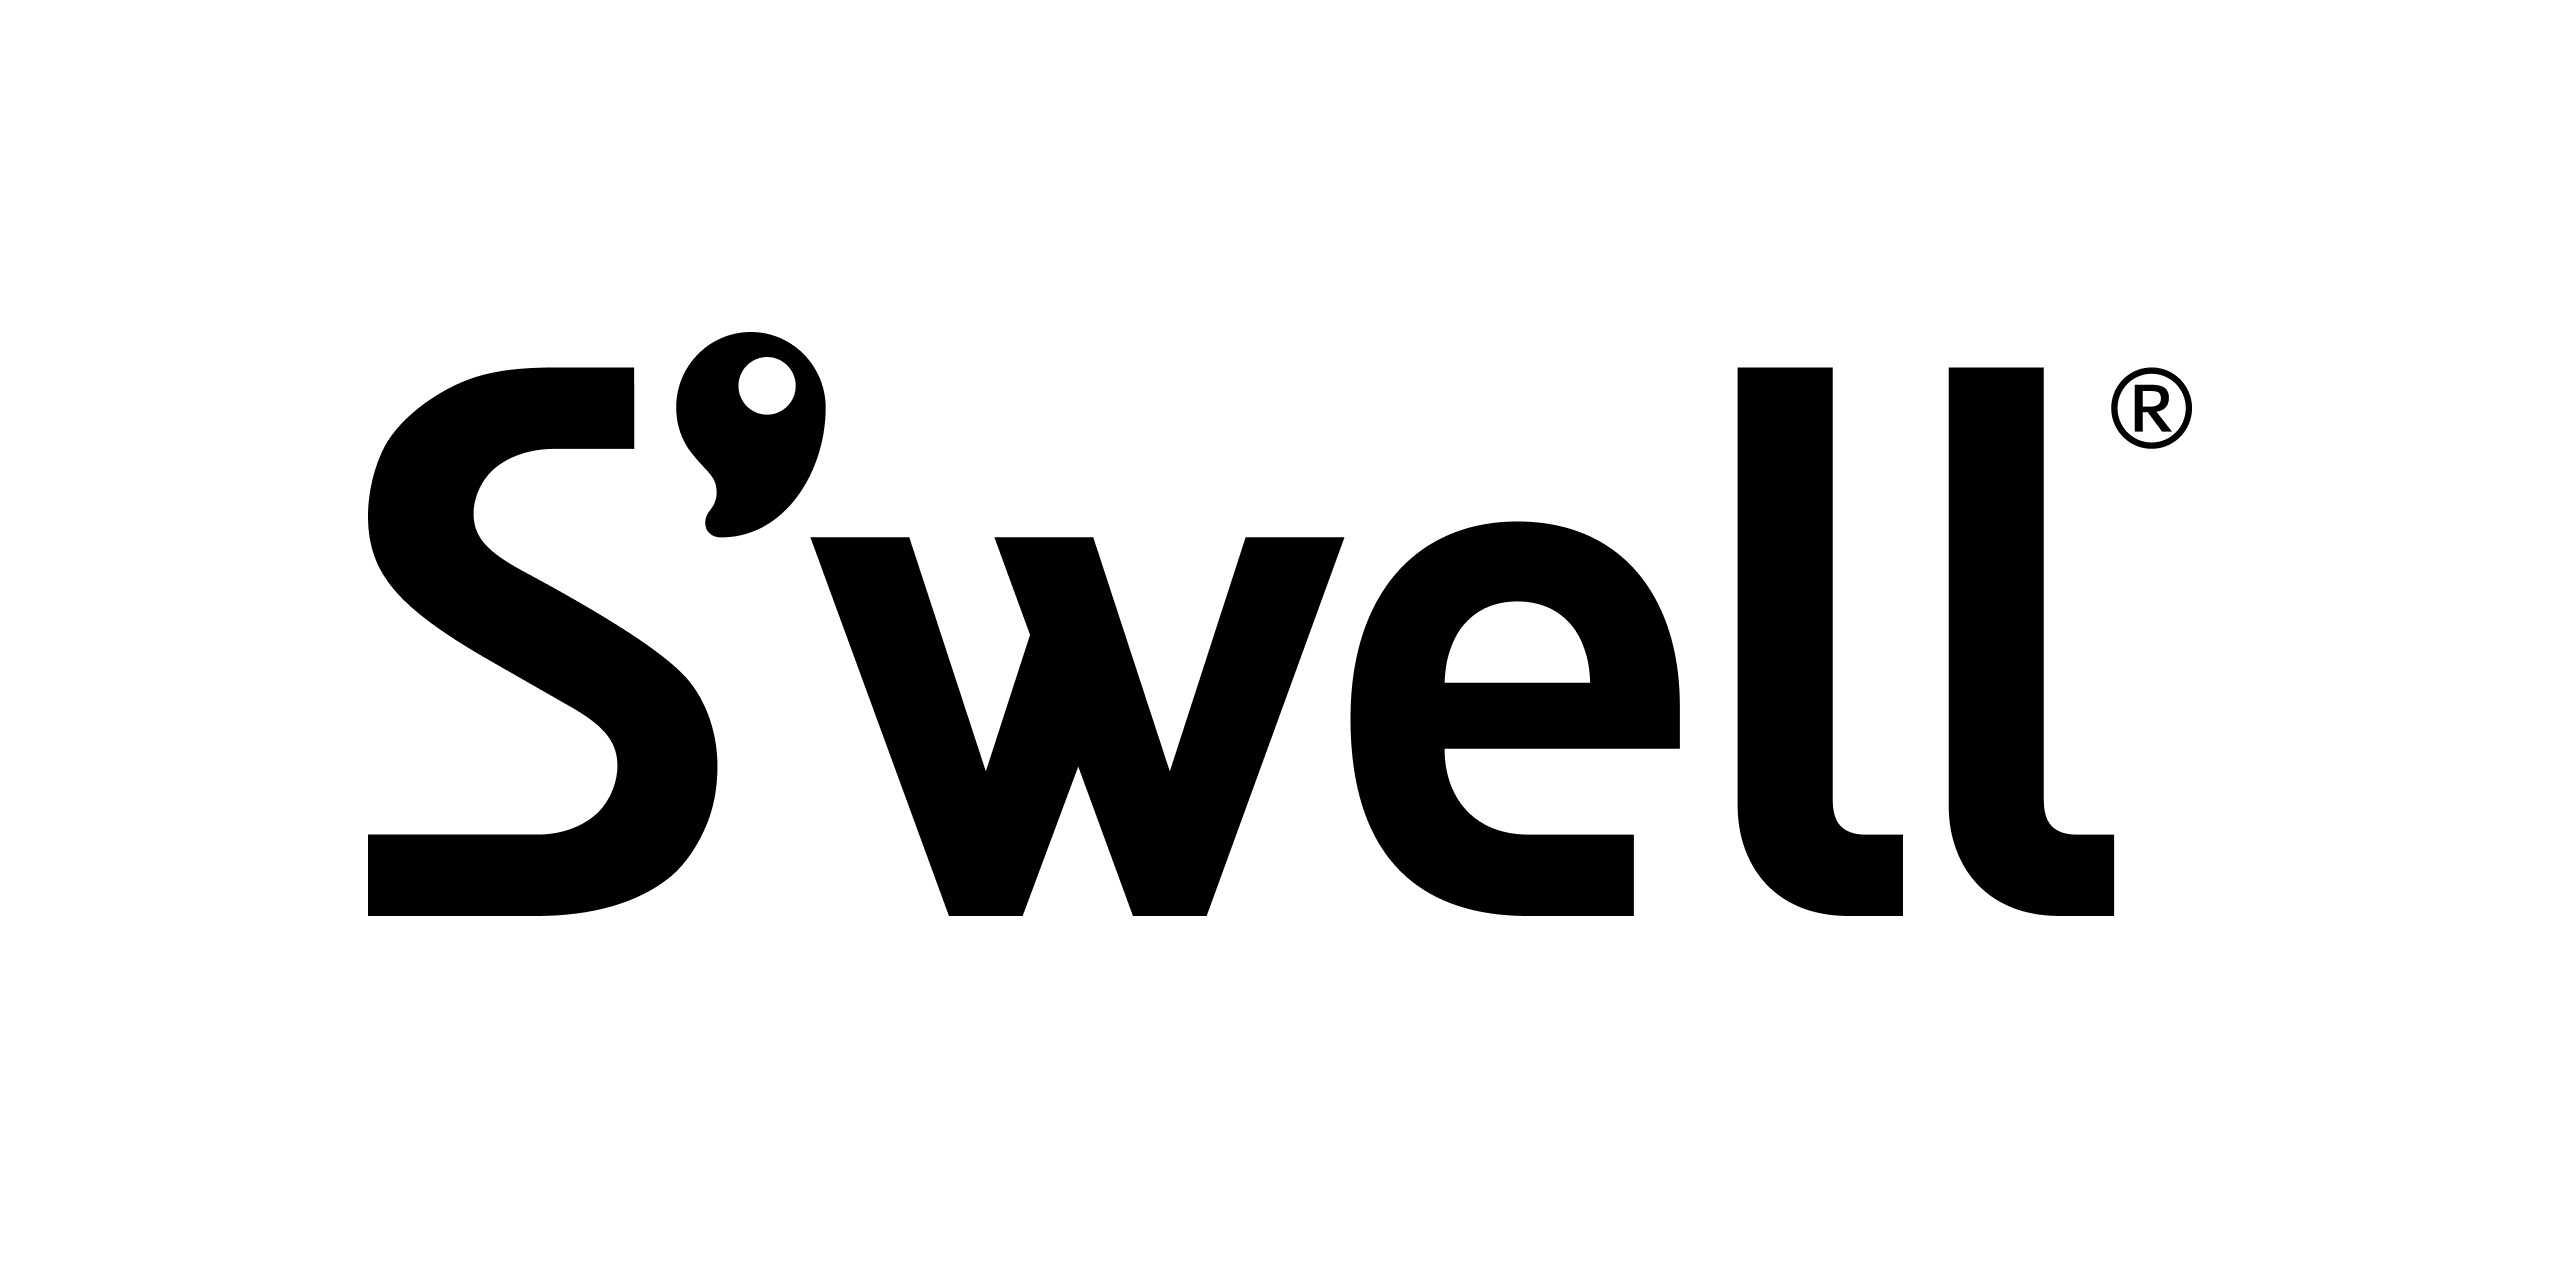 Introducing S'well Eats™ 